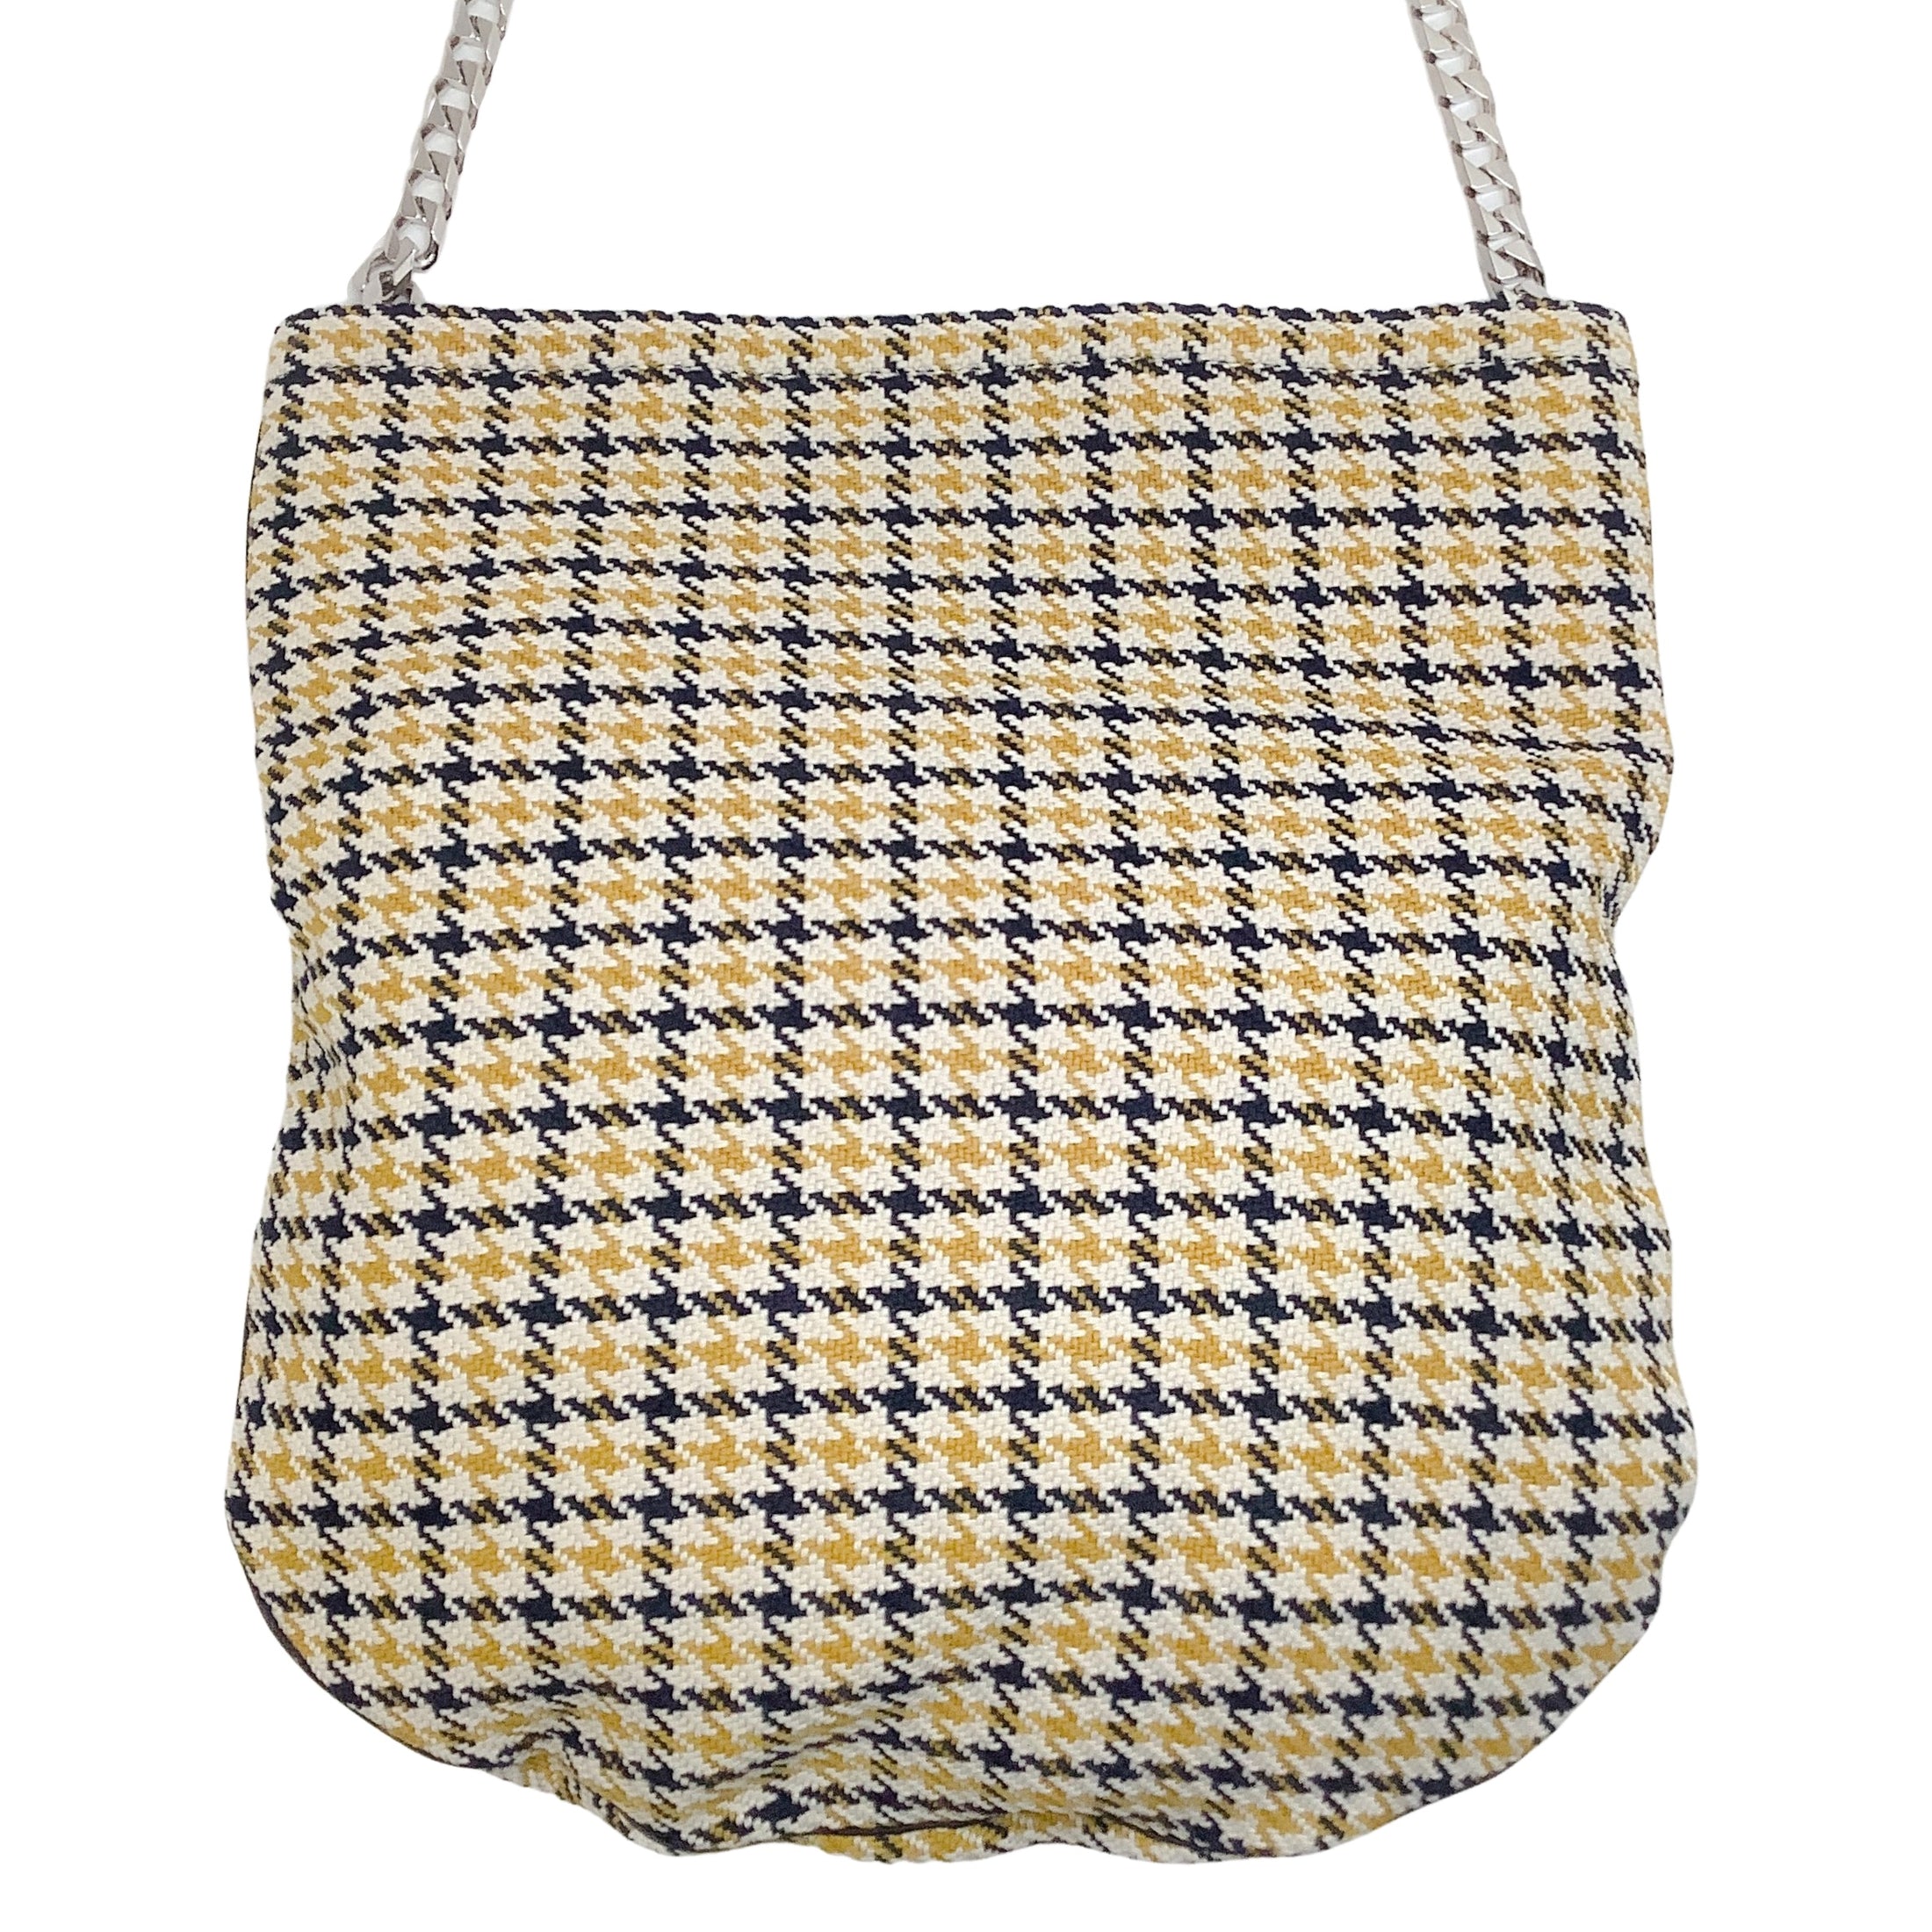 Victoria Beckham Black / Yellow Houndstooth Shoulder Bag With Chain Strap